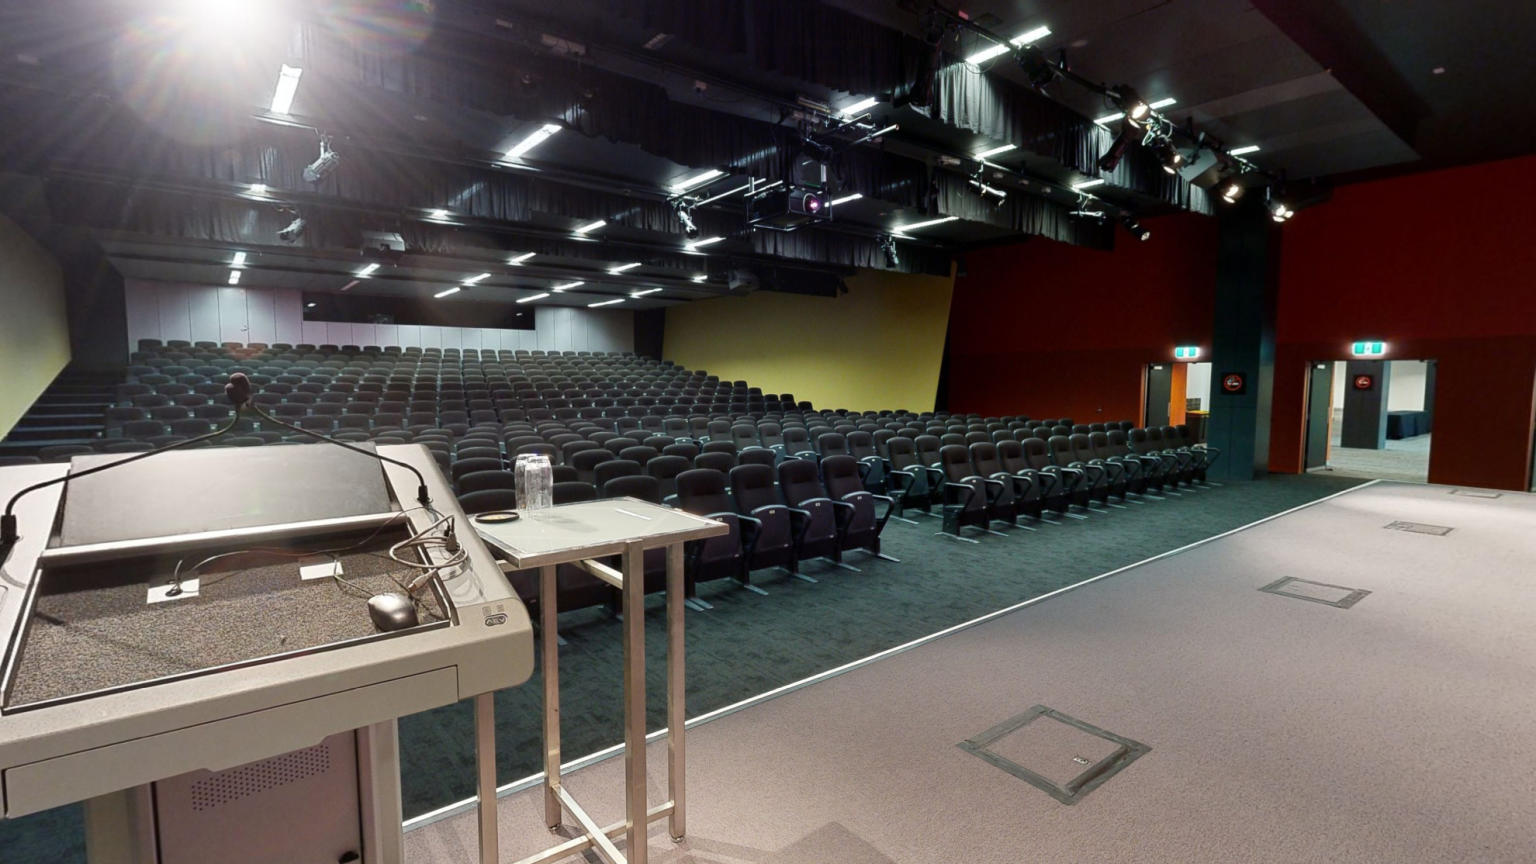 A spacious auditorium featuring neatly arranged rows of chairs and a prominent podium at the front, perfect for hosting large events and conferences.